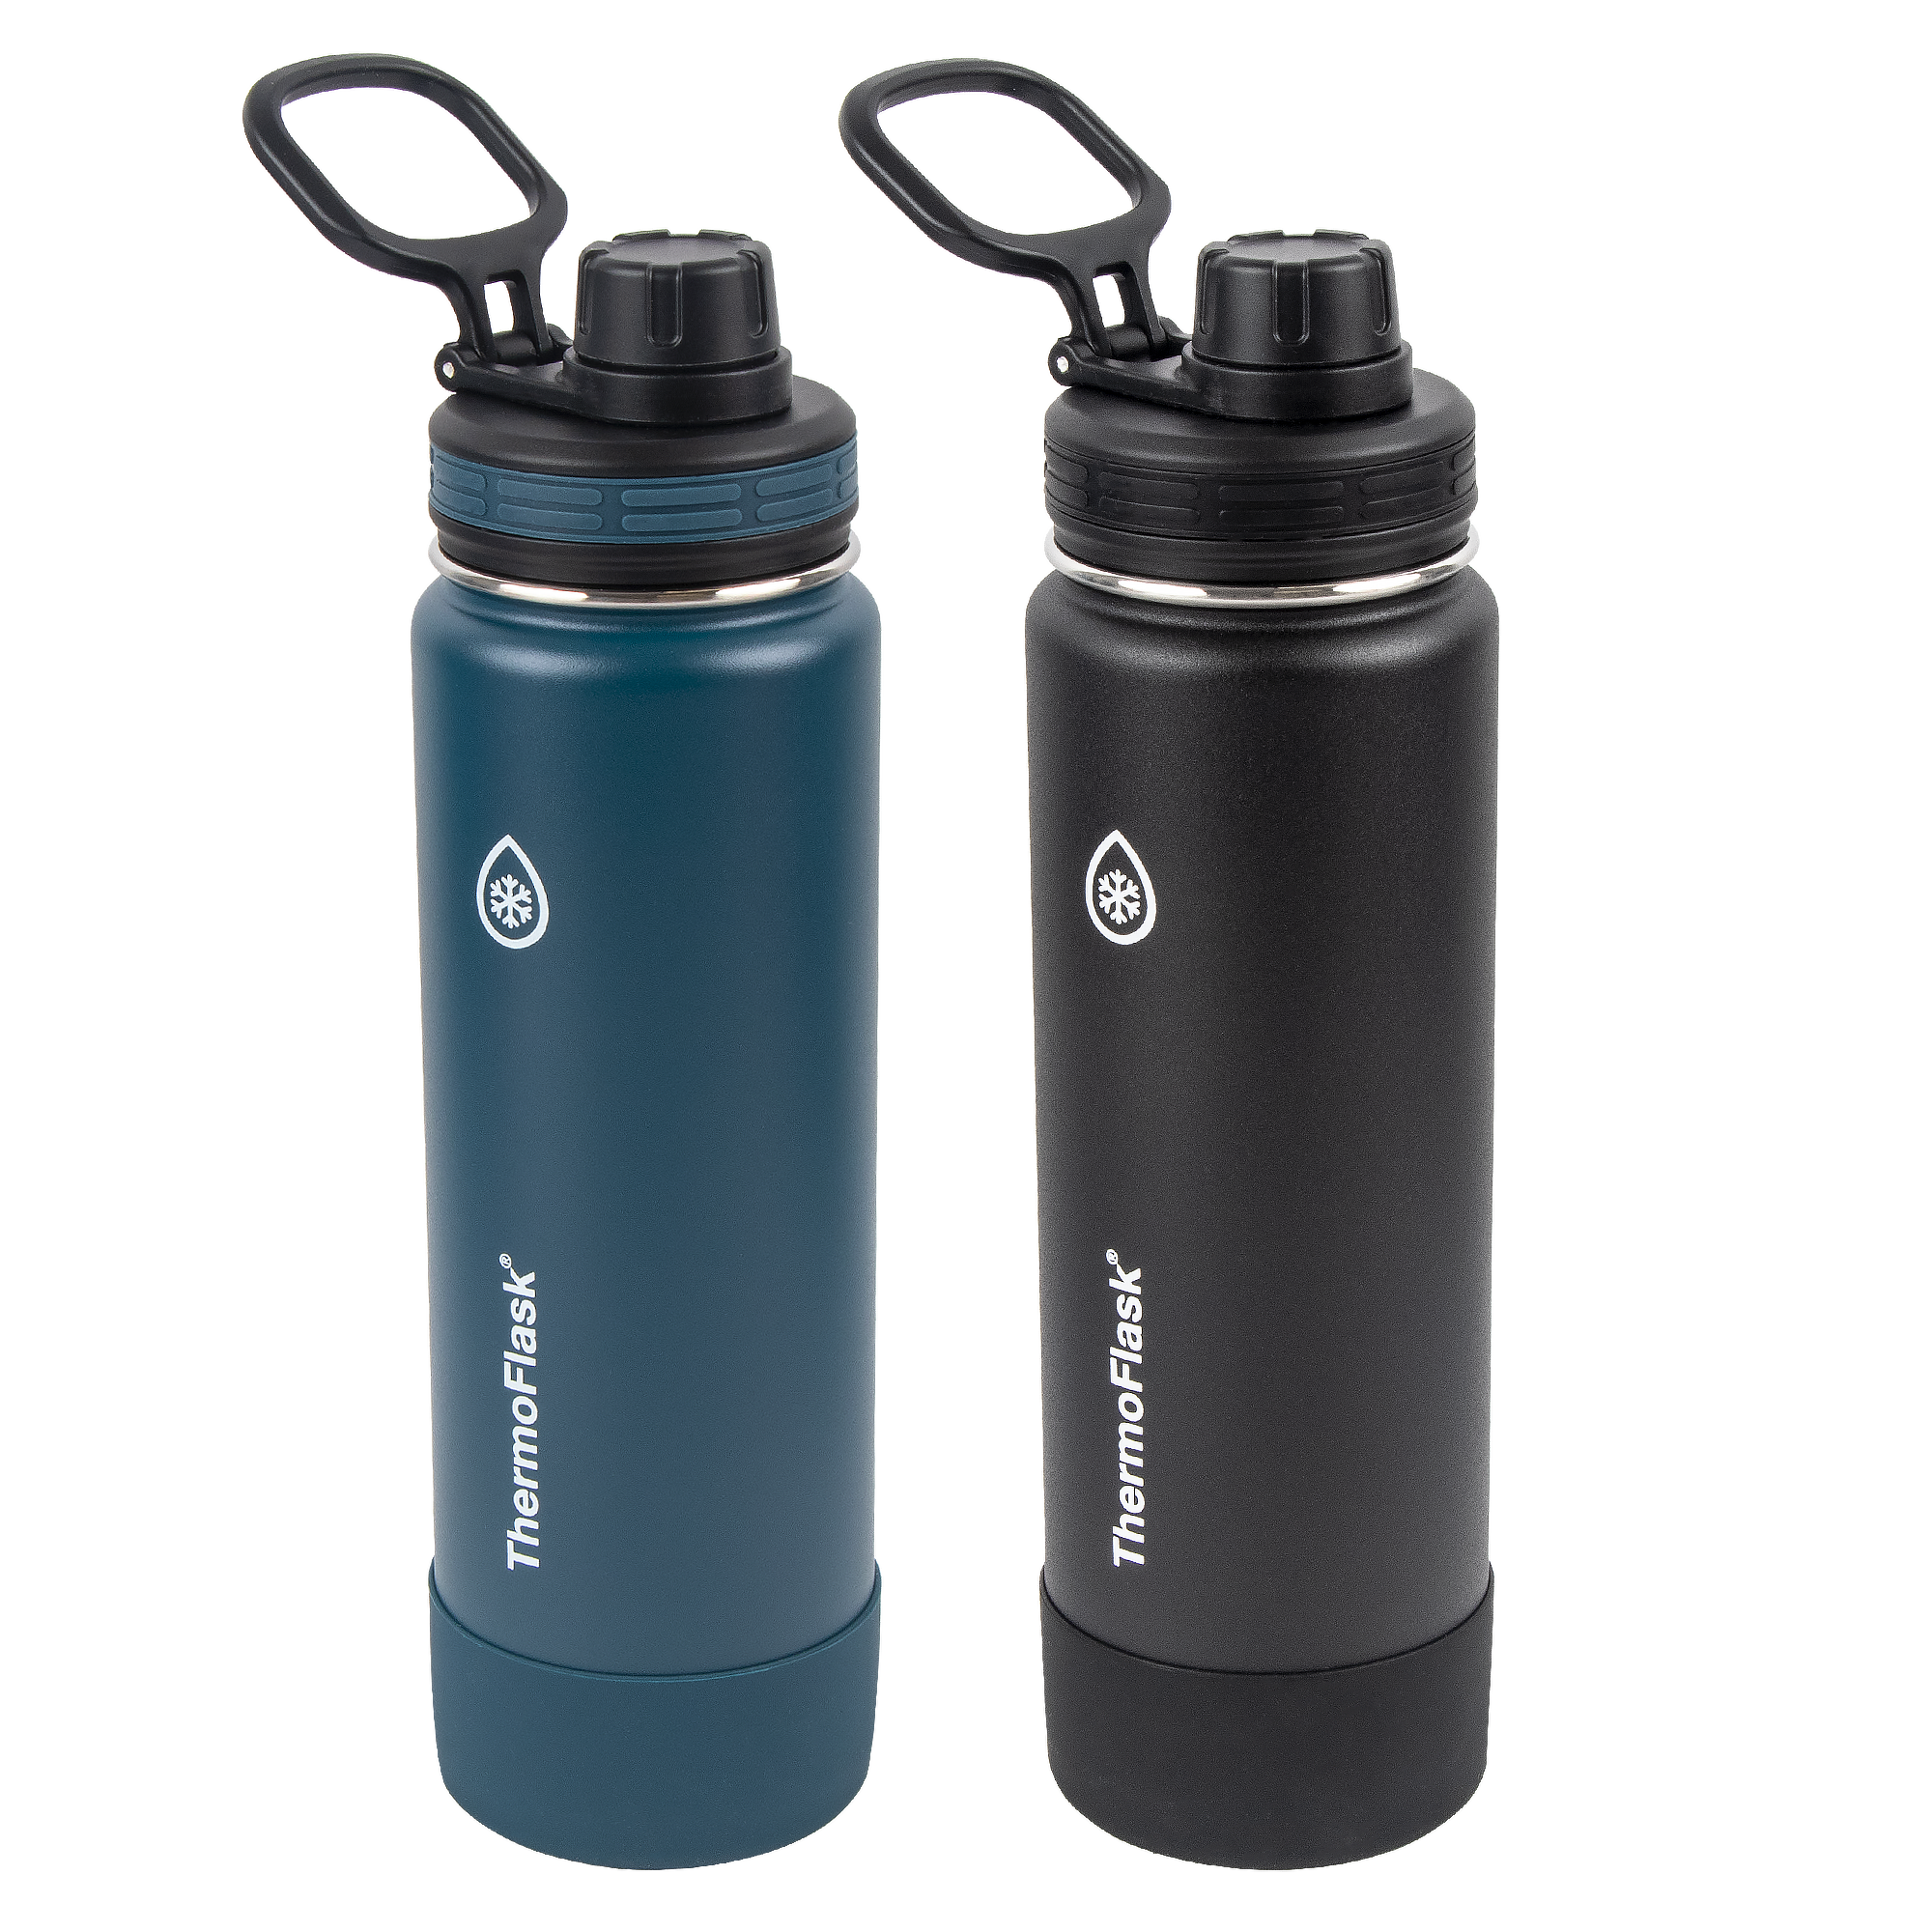 http://mythermoflask.com/cdn/shop/products/1424563-Thermoflask-Spout-24-MayanBlue-Black-FrontAngle_2000x.png?v=1655766993